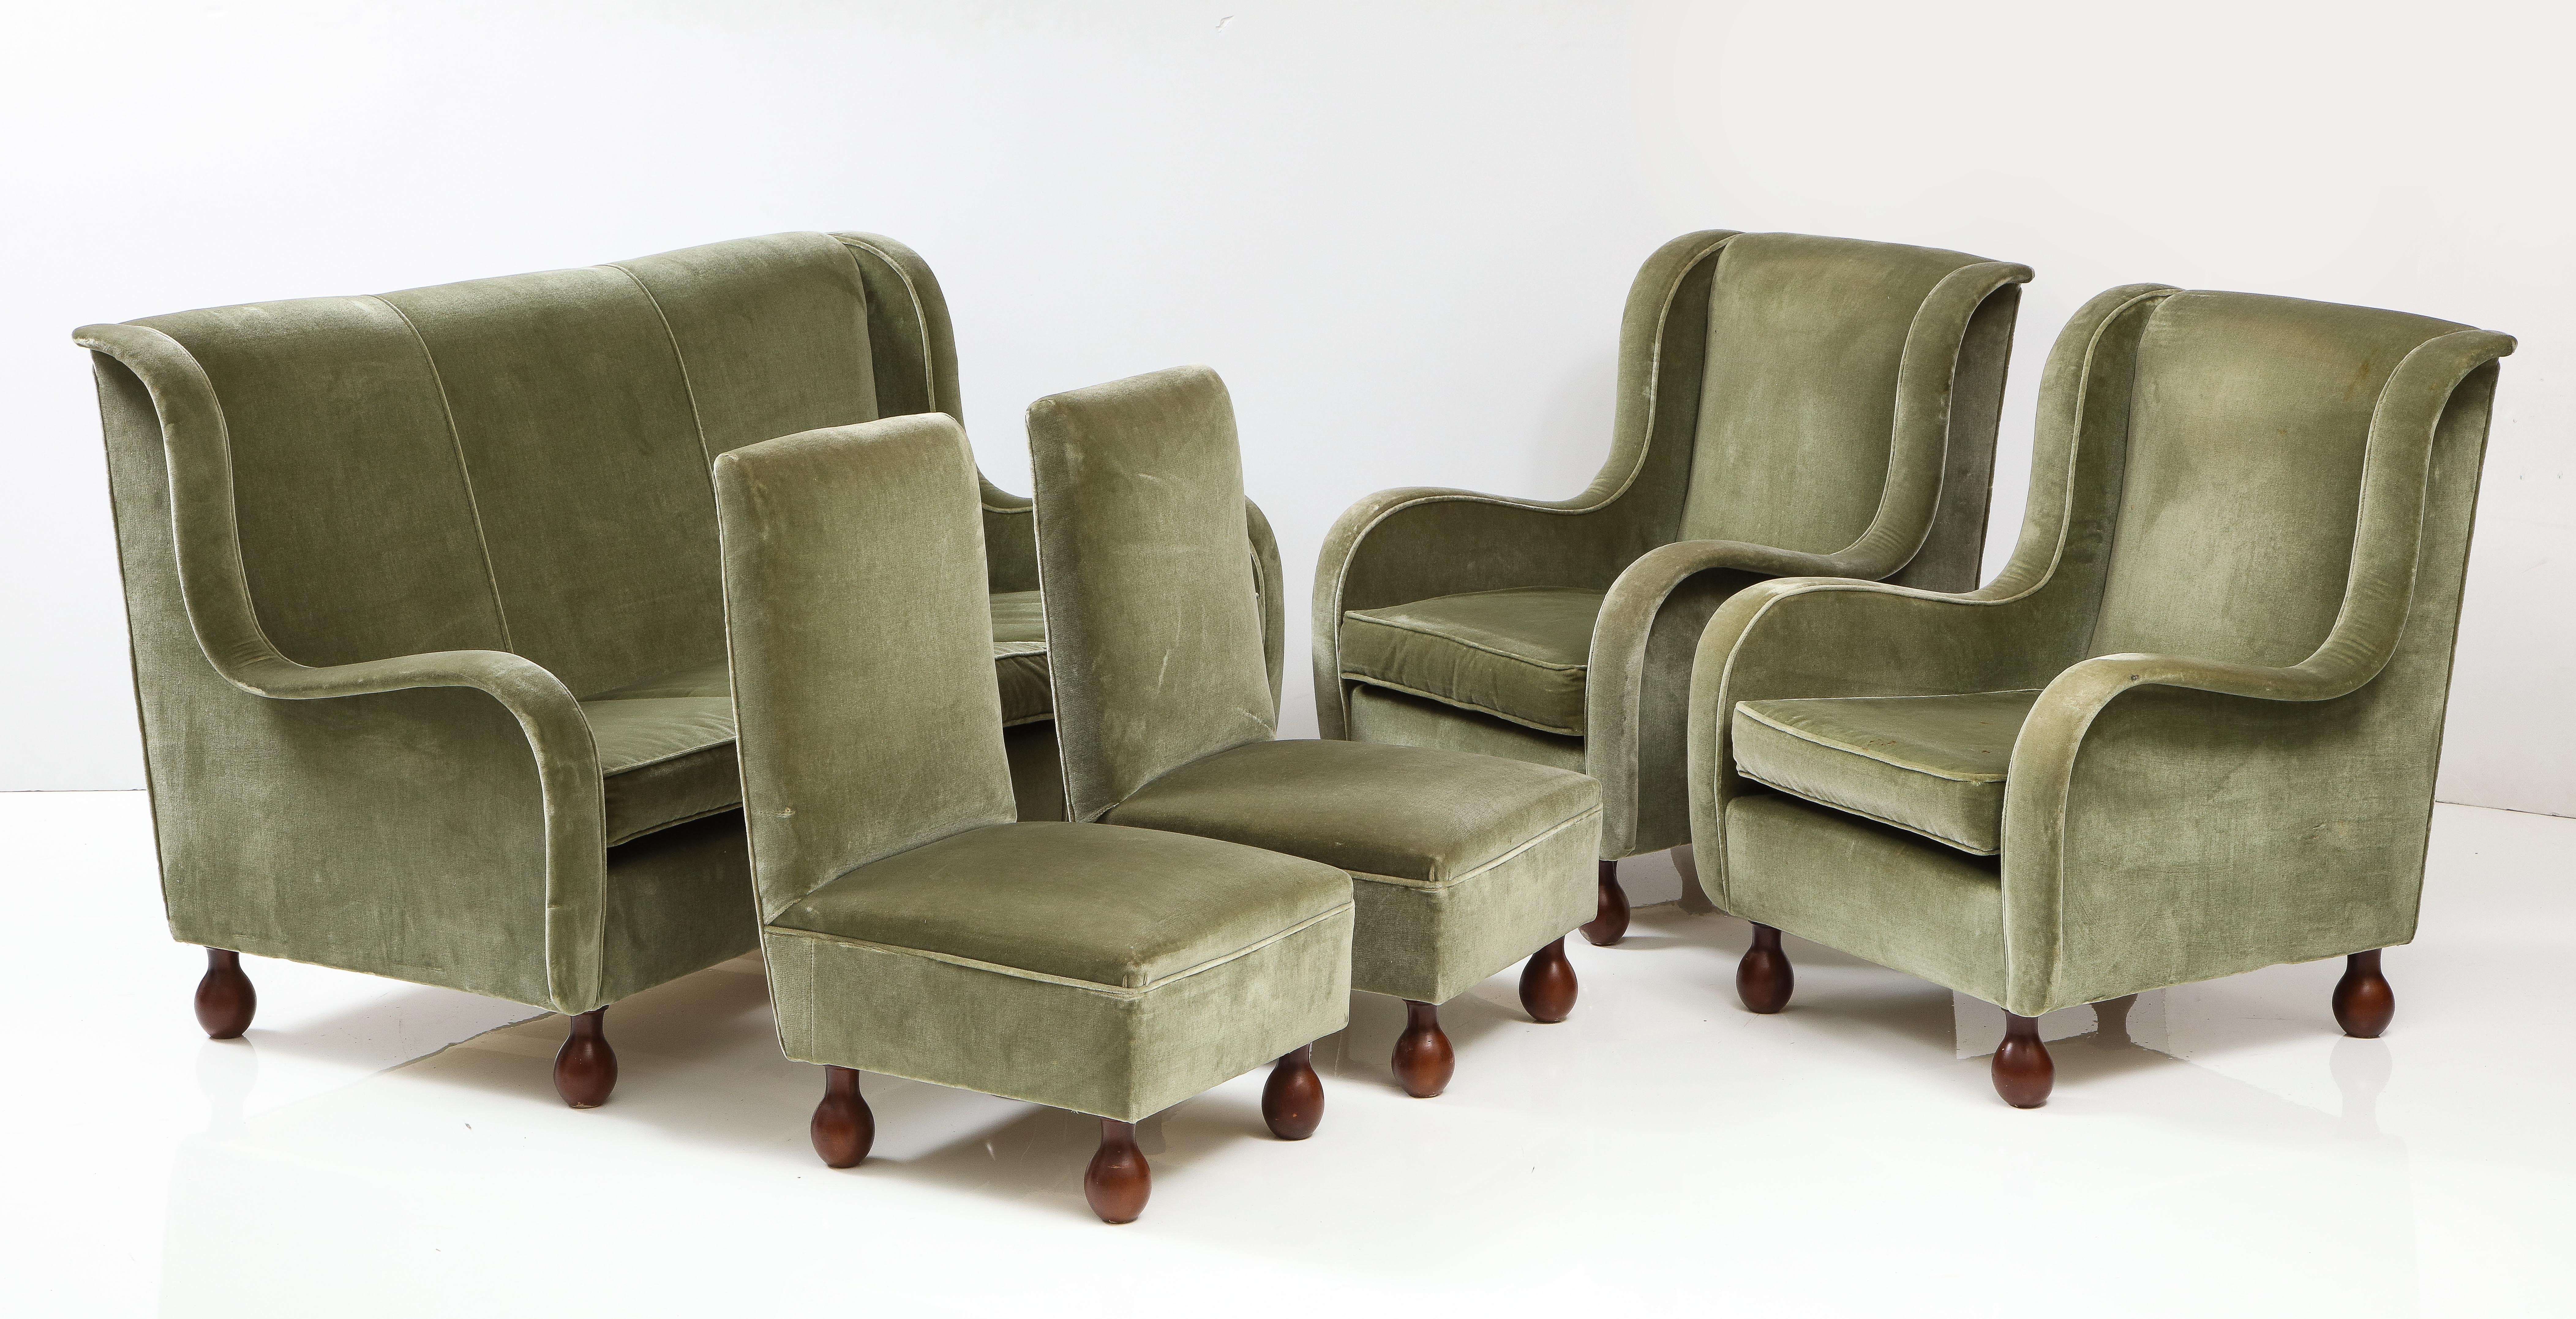 Italian 1940's Living Room Suite, Sofa, Pair of Chairs, Pair of Slipper Chair 6